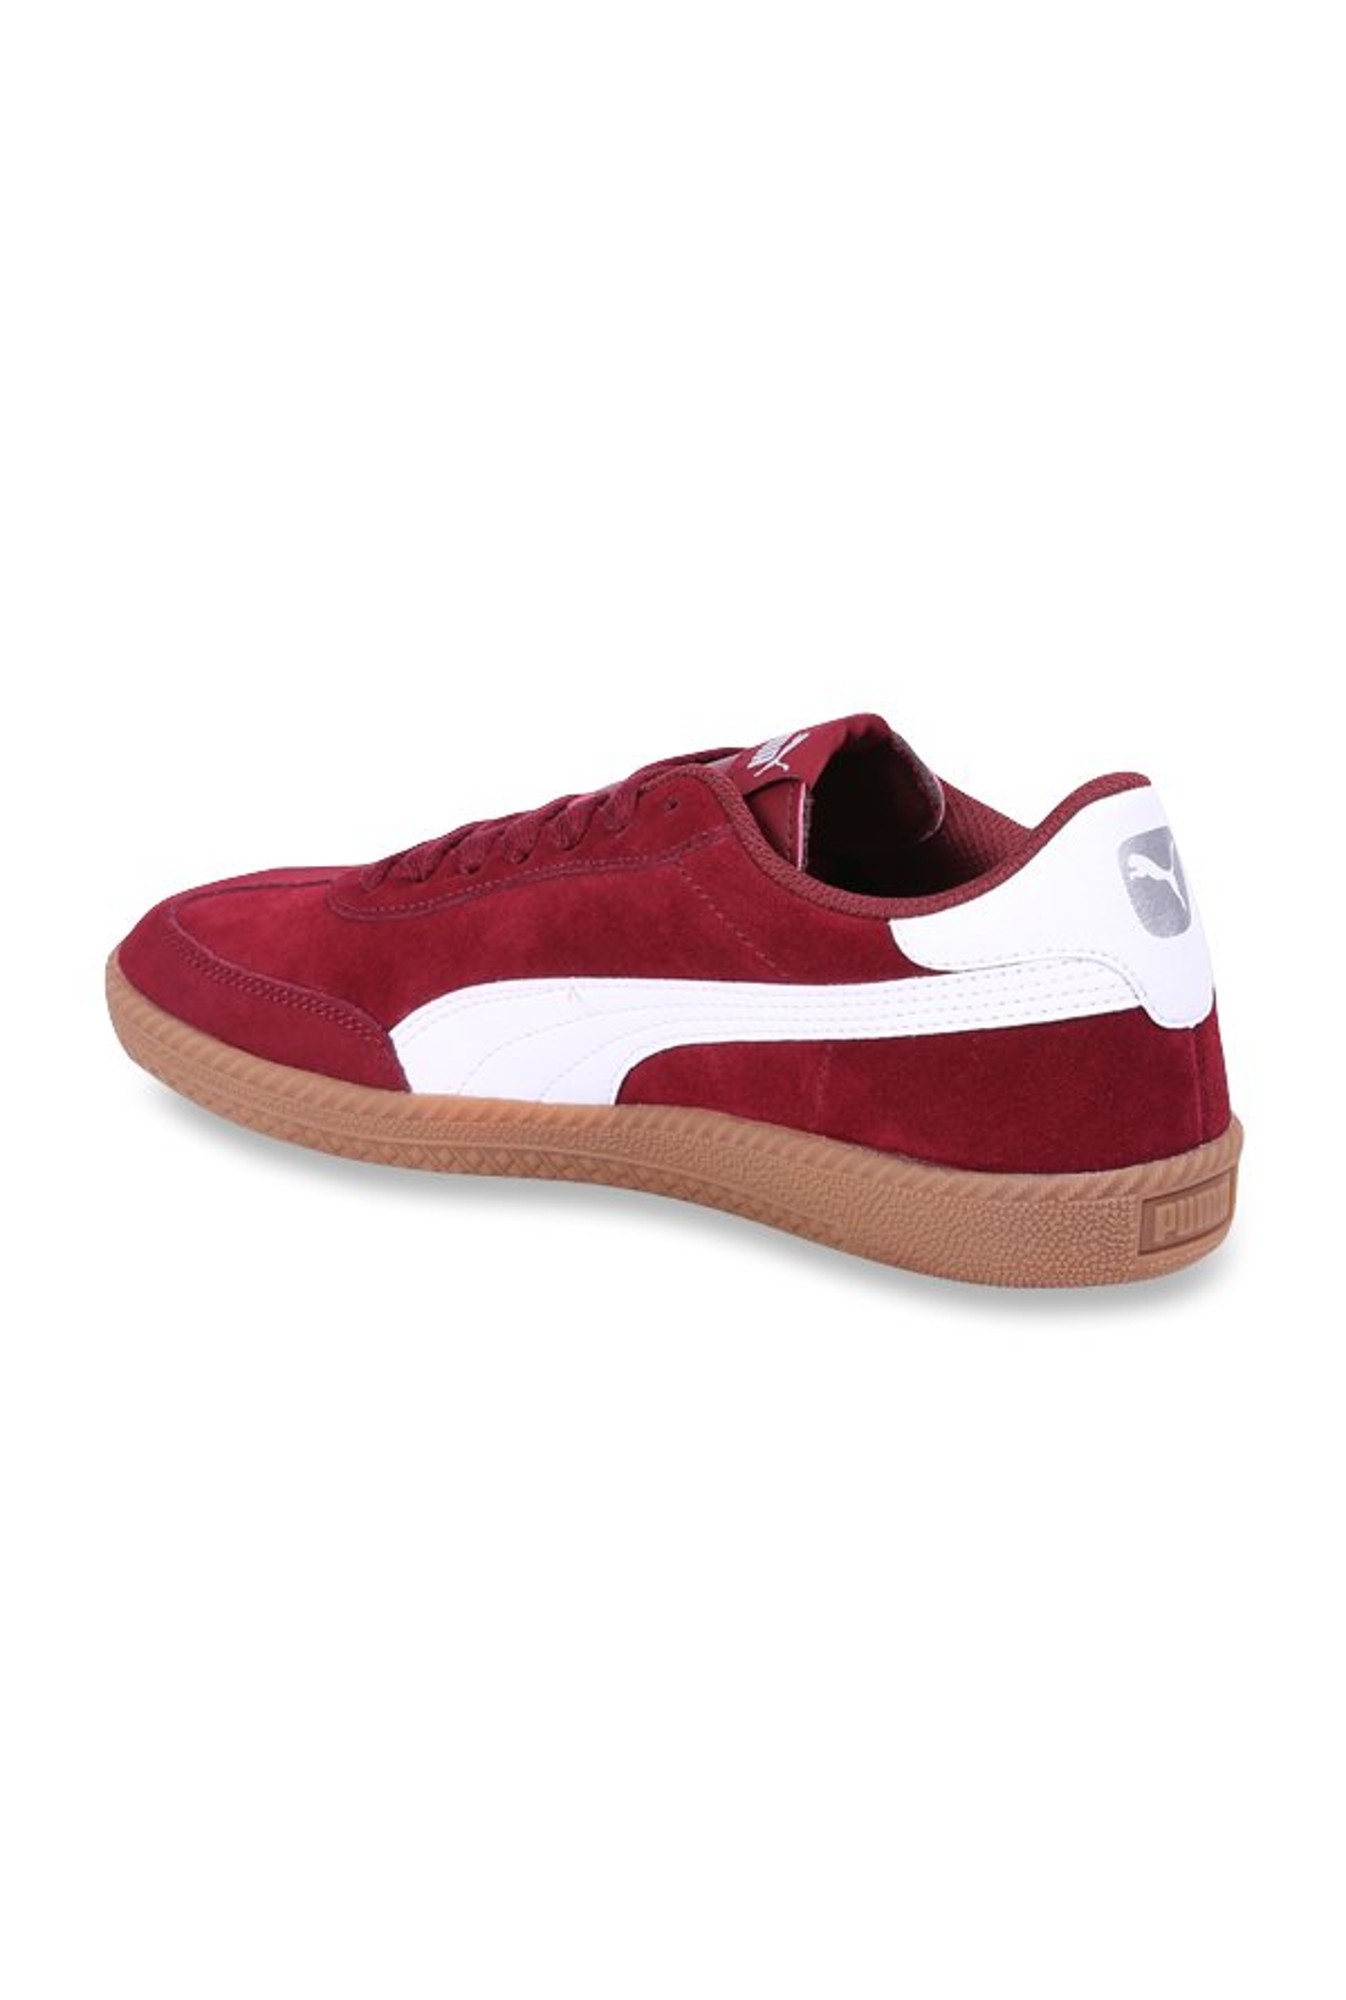 Buy Puma Astro Cup Pomegranate Sneakers 